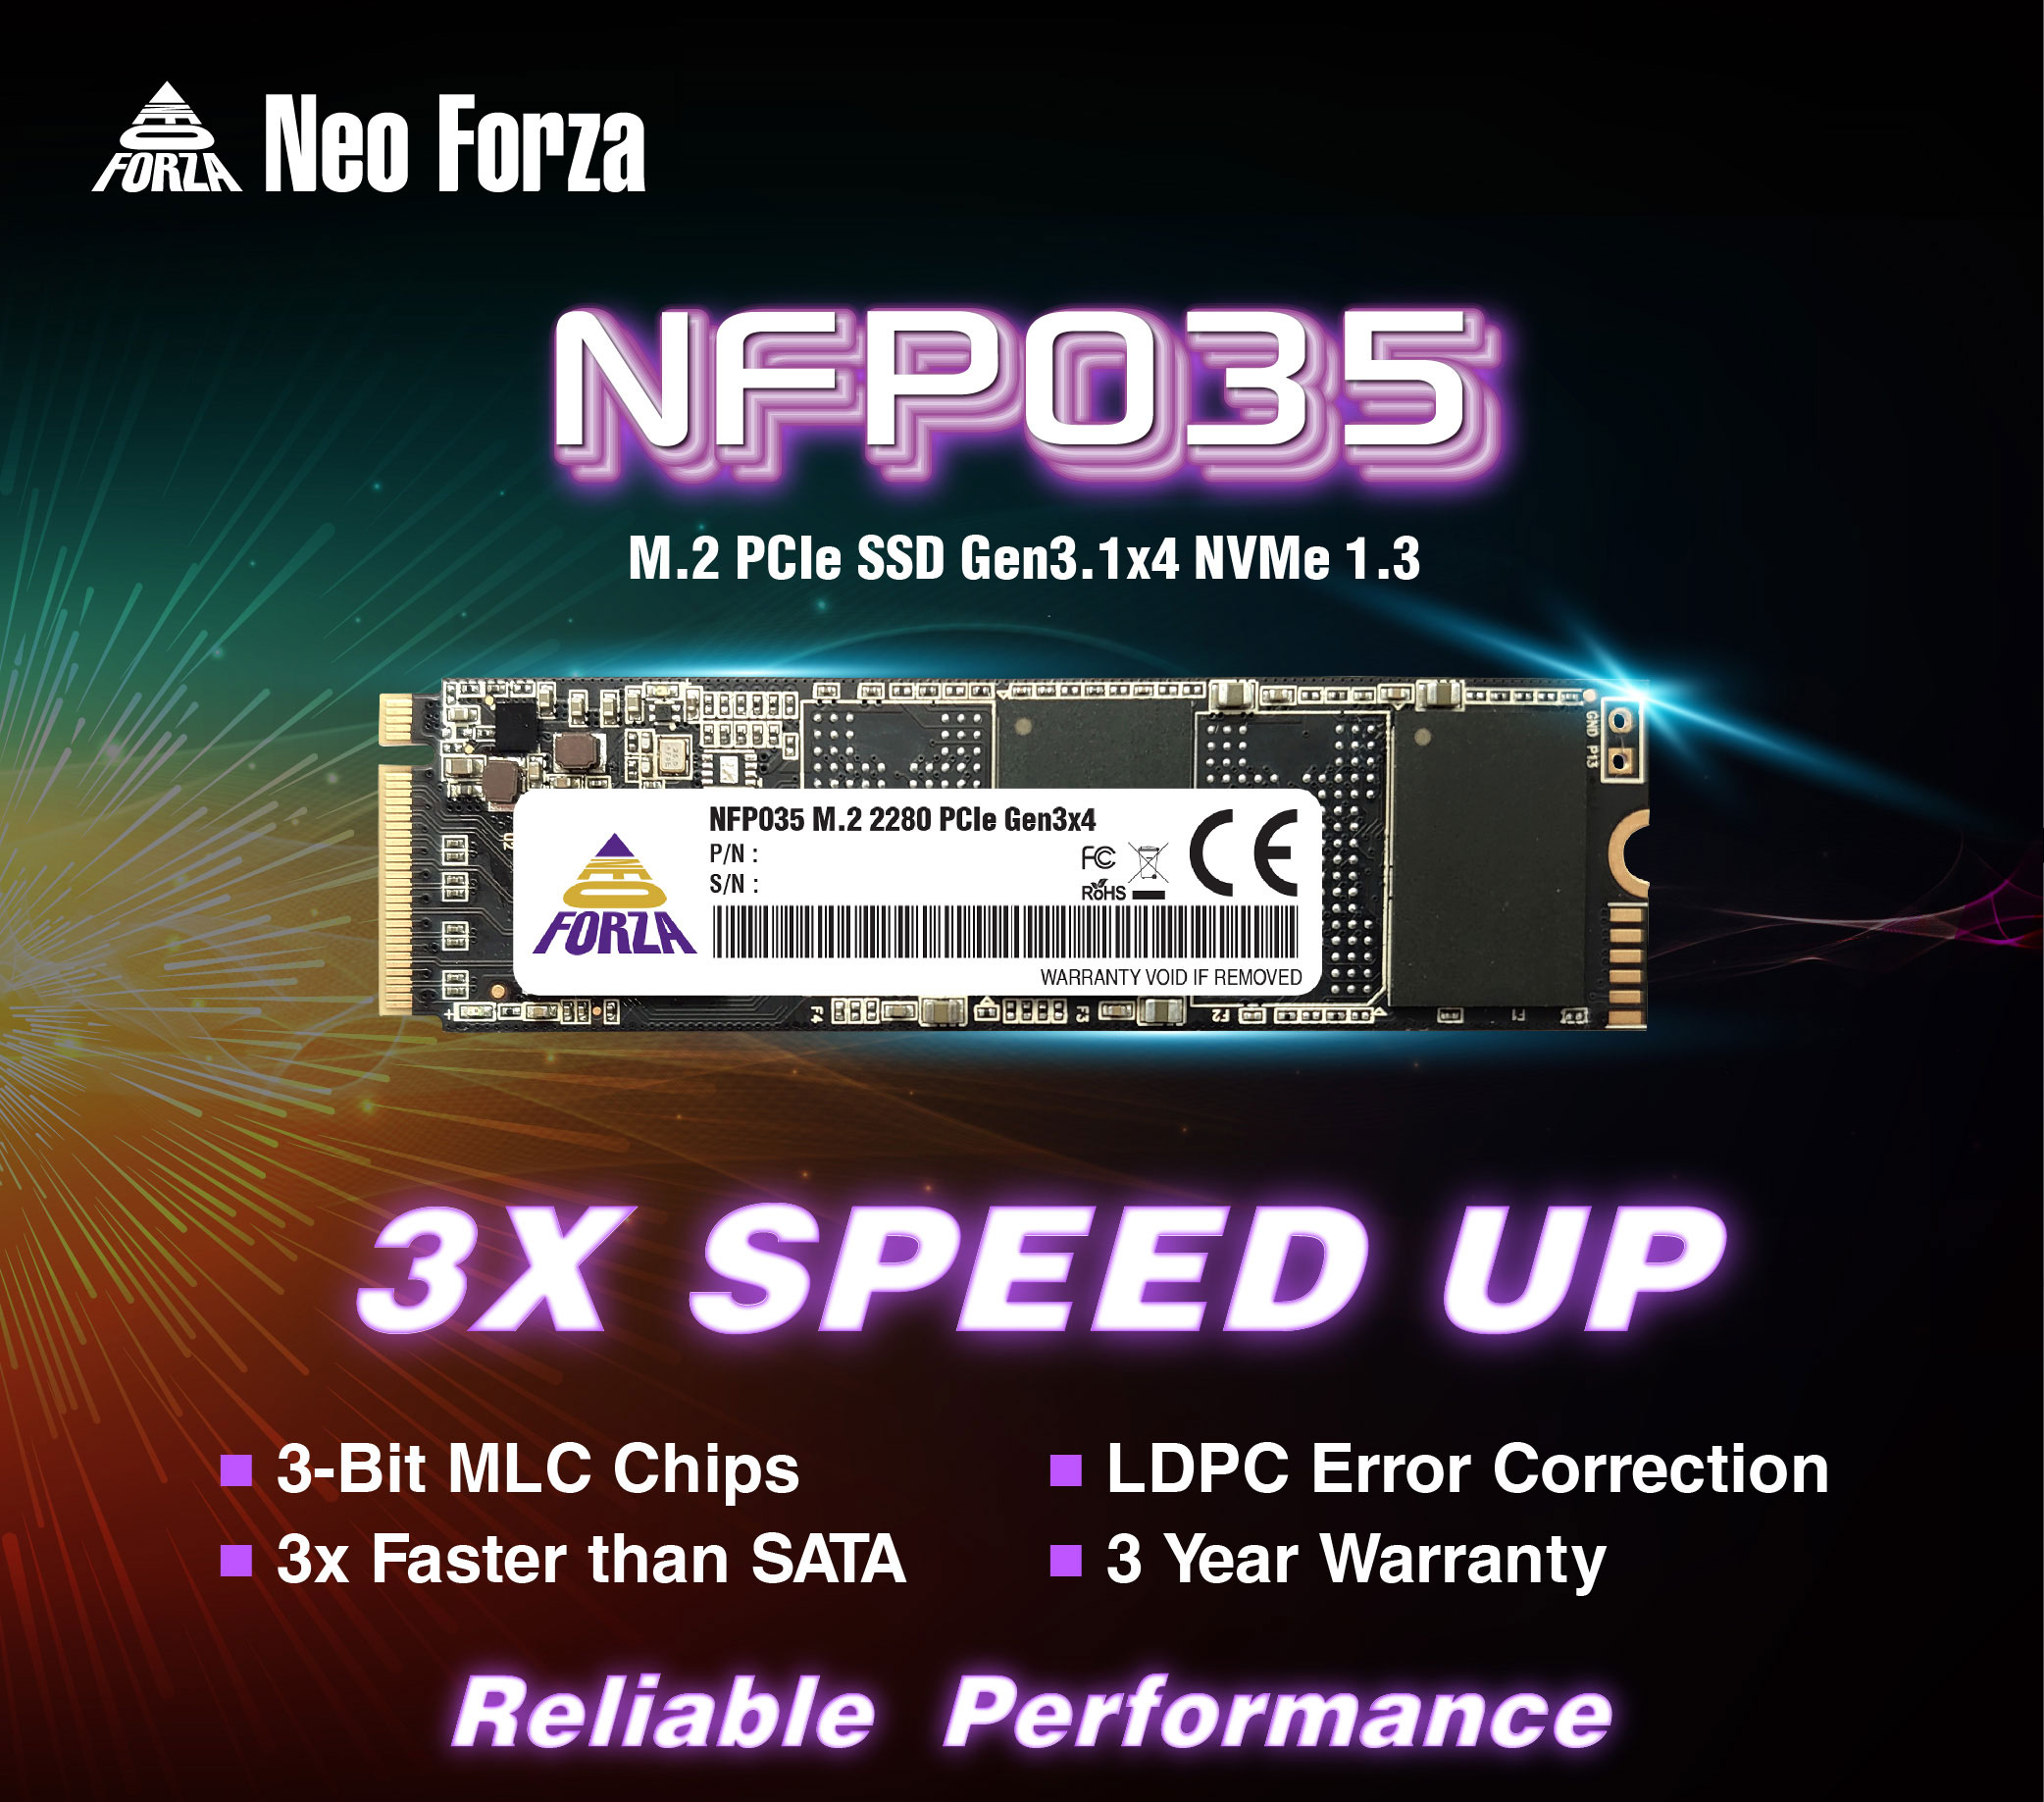 Neo Forza NFP035 SSD